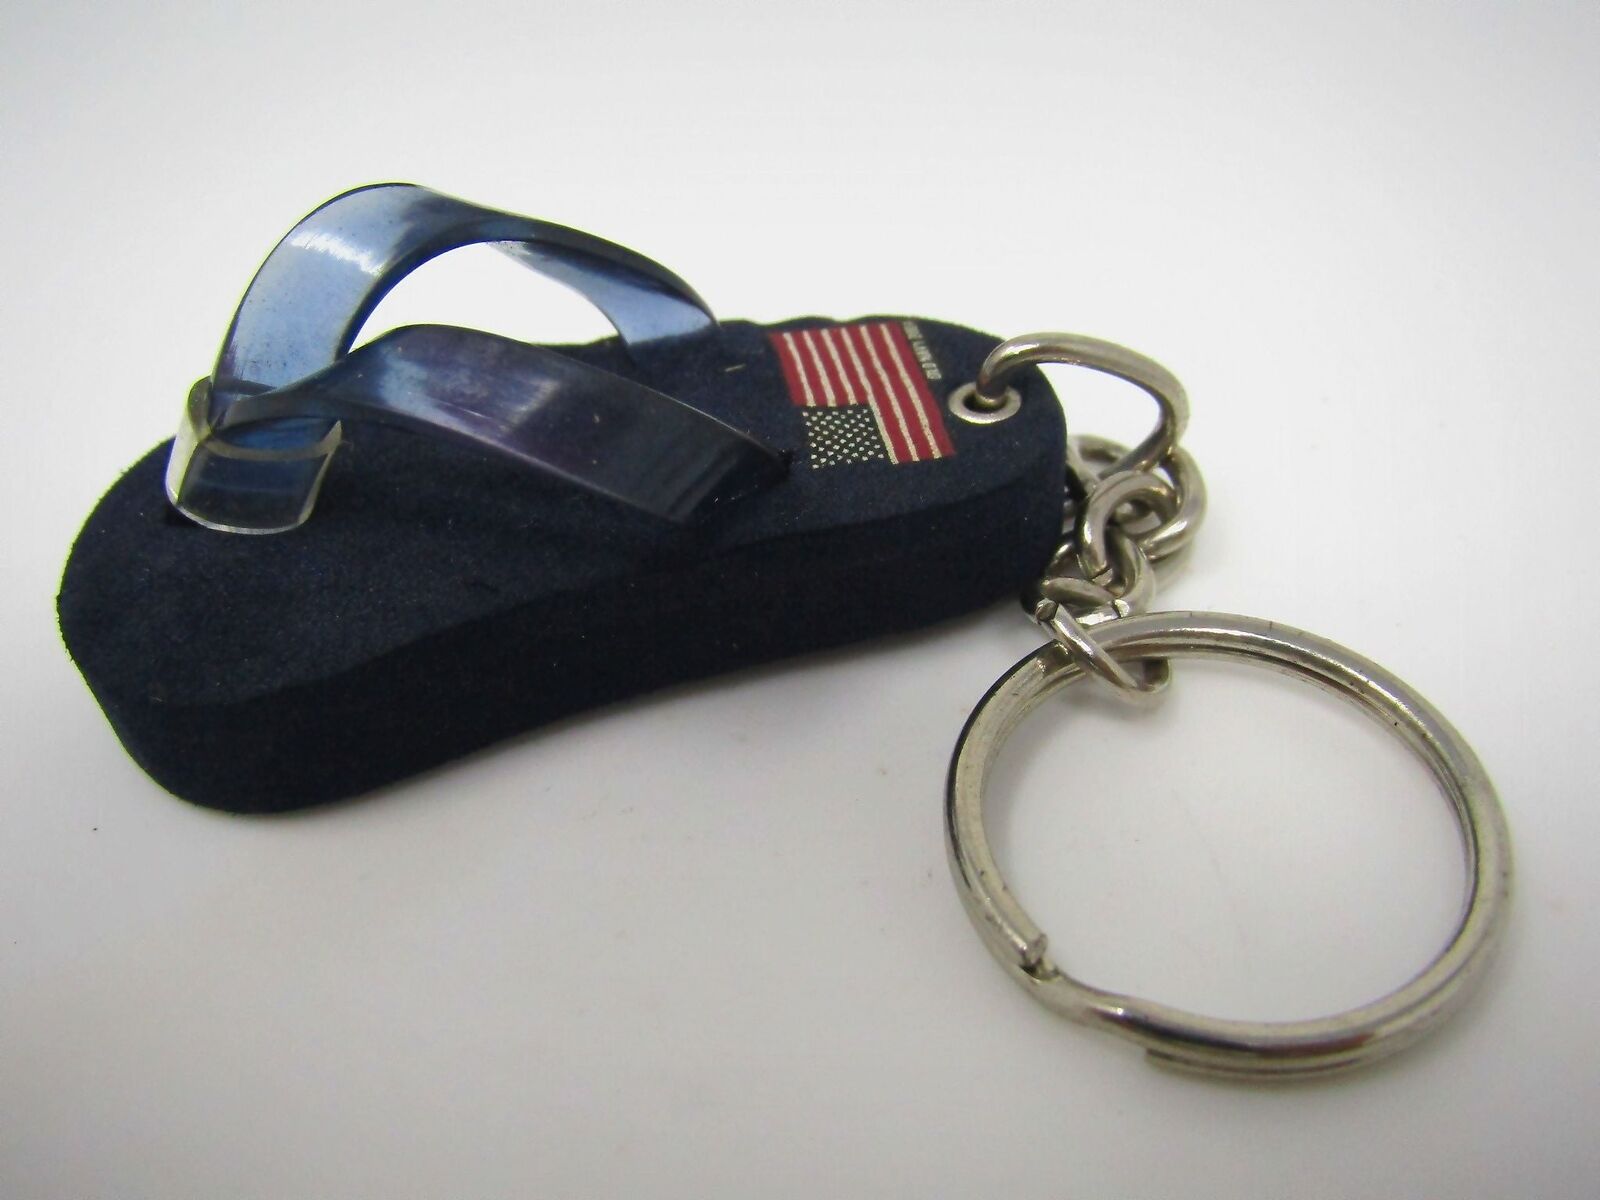 Collectible Keychain Charm: 2004 Old Navy Sandal Design